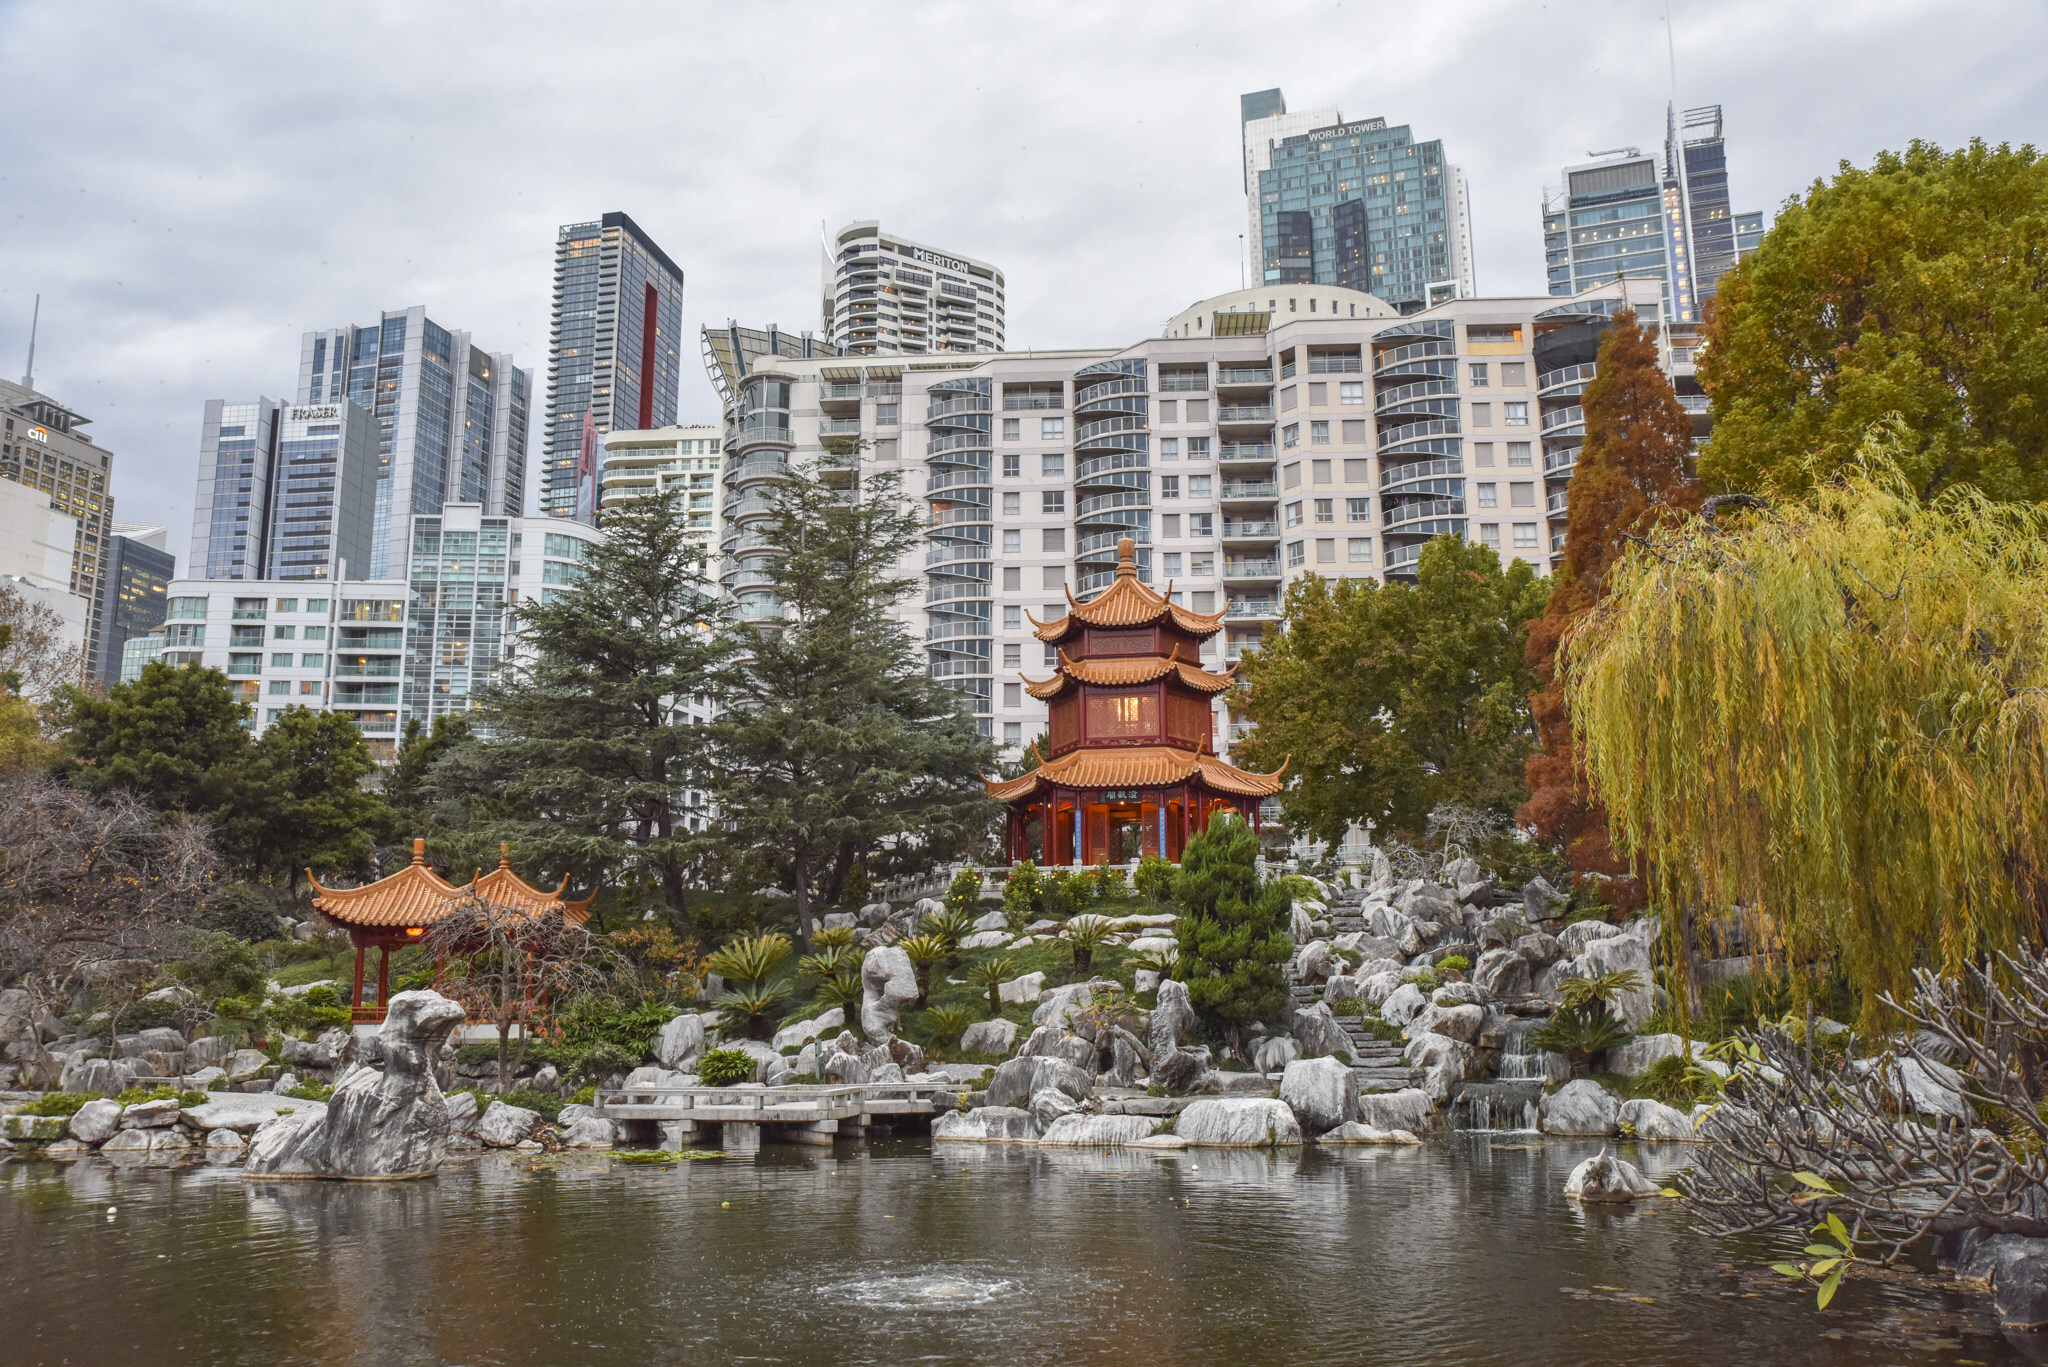 Sydney’s Chinese Garden of Friendship is one of many places and monuments that help explain the deep relationship that exists between the city and its Chinese residents. Photo: Ronan O’Connell